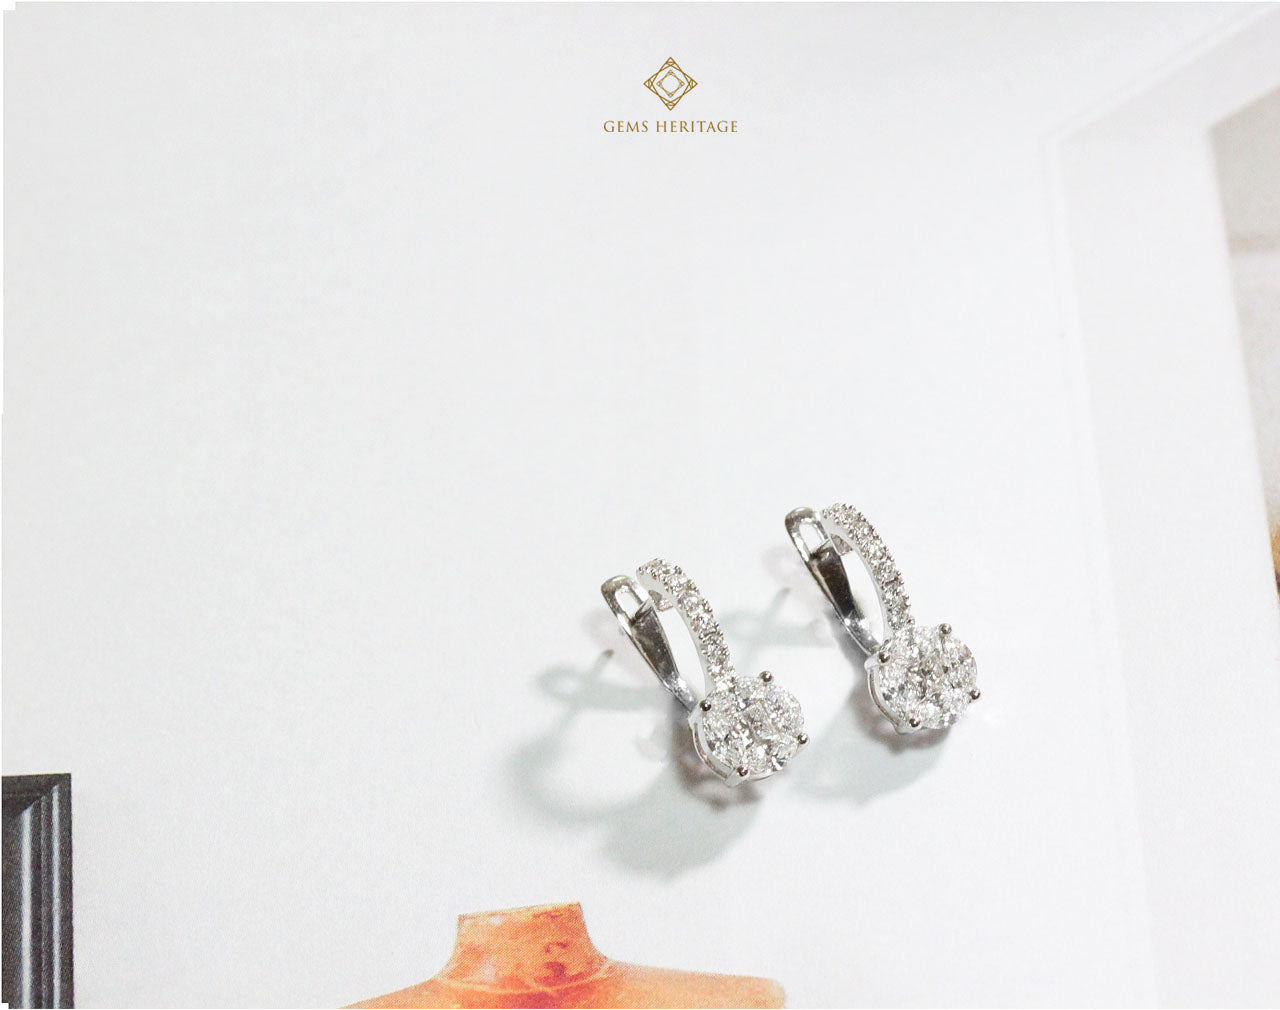 Illusion setting Diamond earrings with small hoops (erwg089)